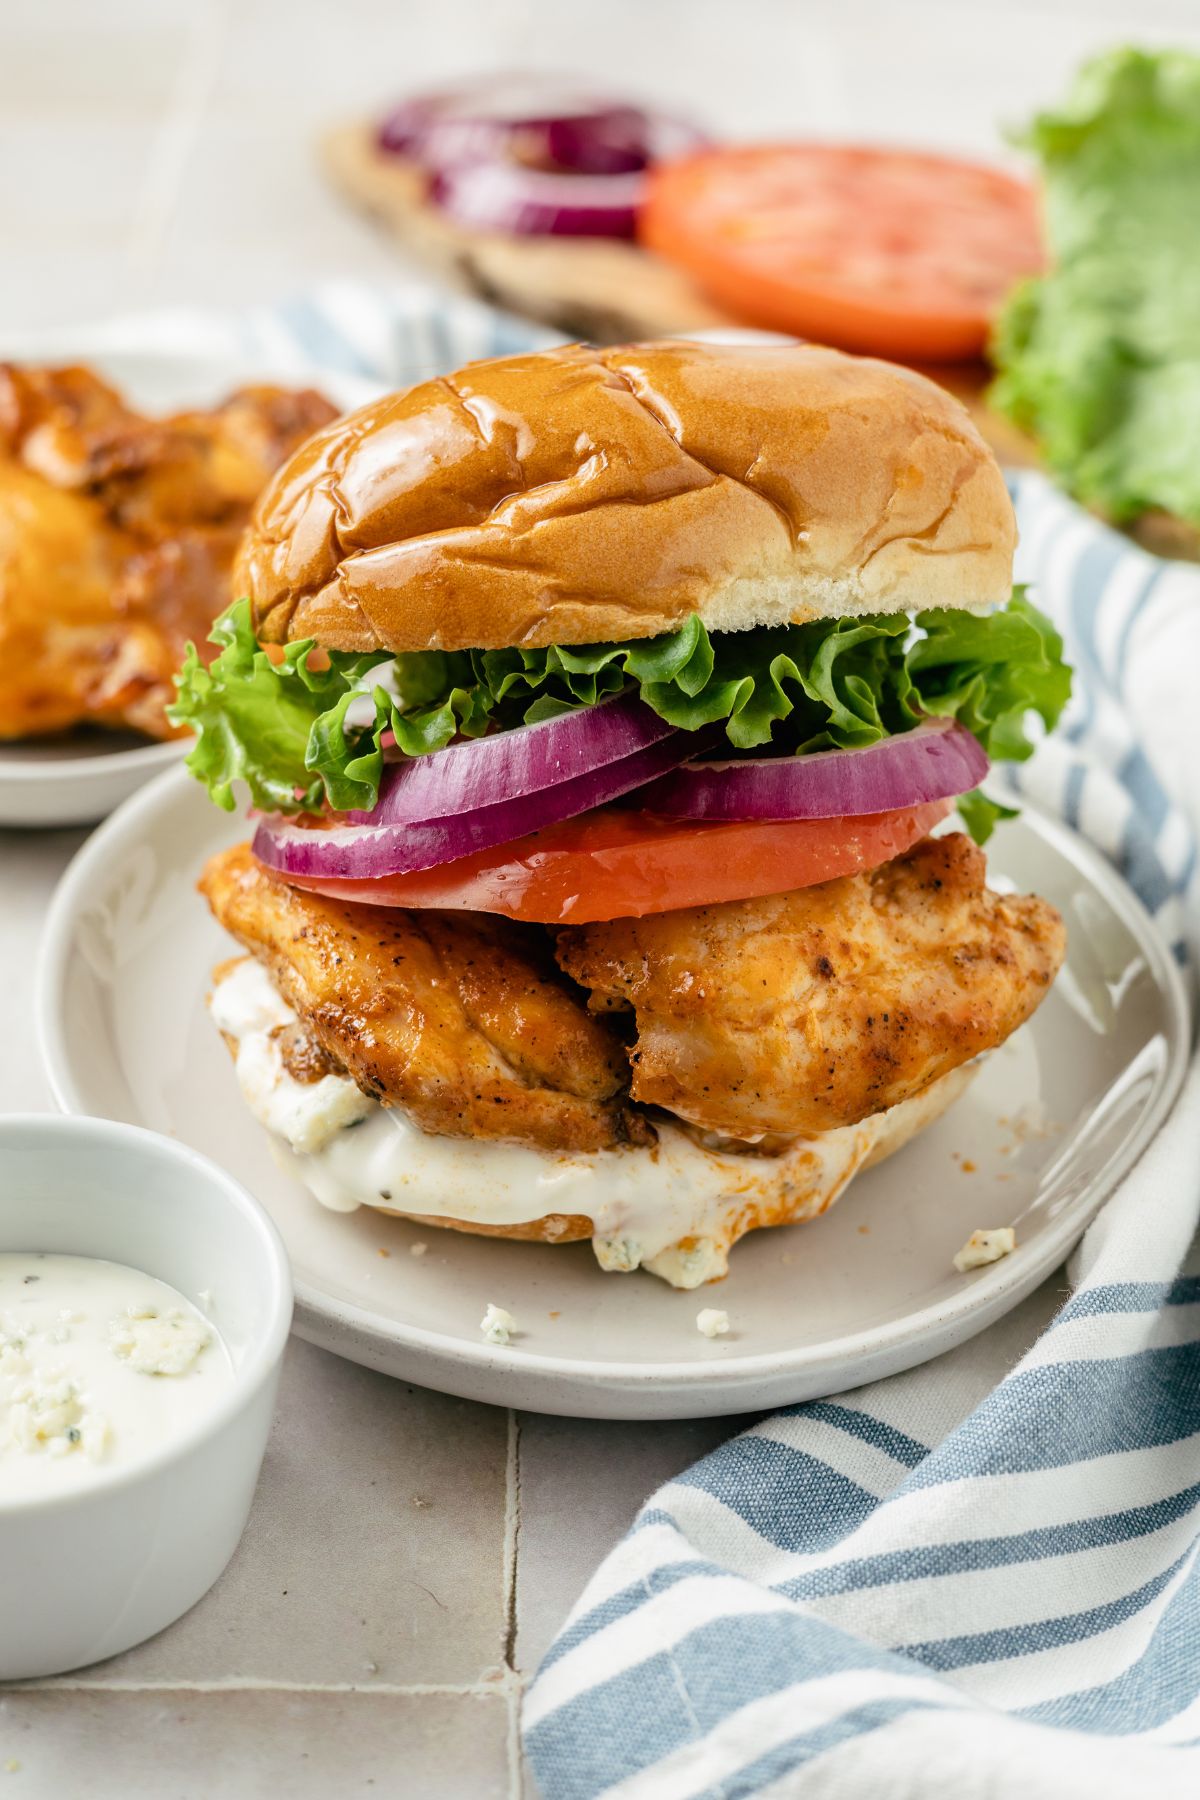 A tangy Buffalo Chicken Sandwich, with crispy chicken on a soft brioche bun, is garnished with butter lettuce, tomato, red onions, and drizzled with creamy blue cheese dressing on a plate.